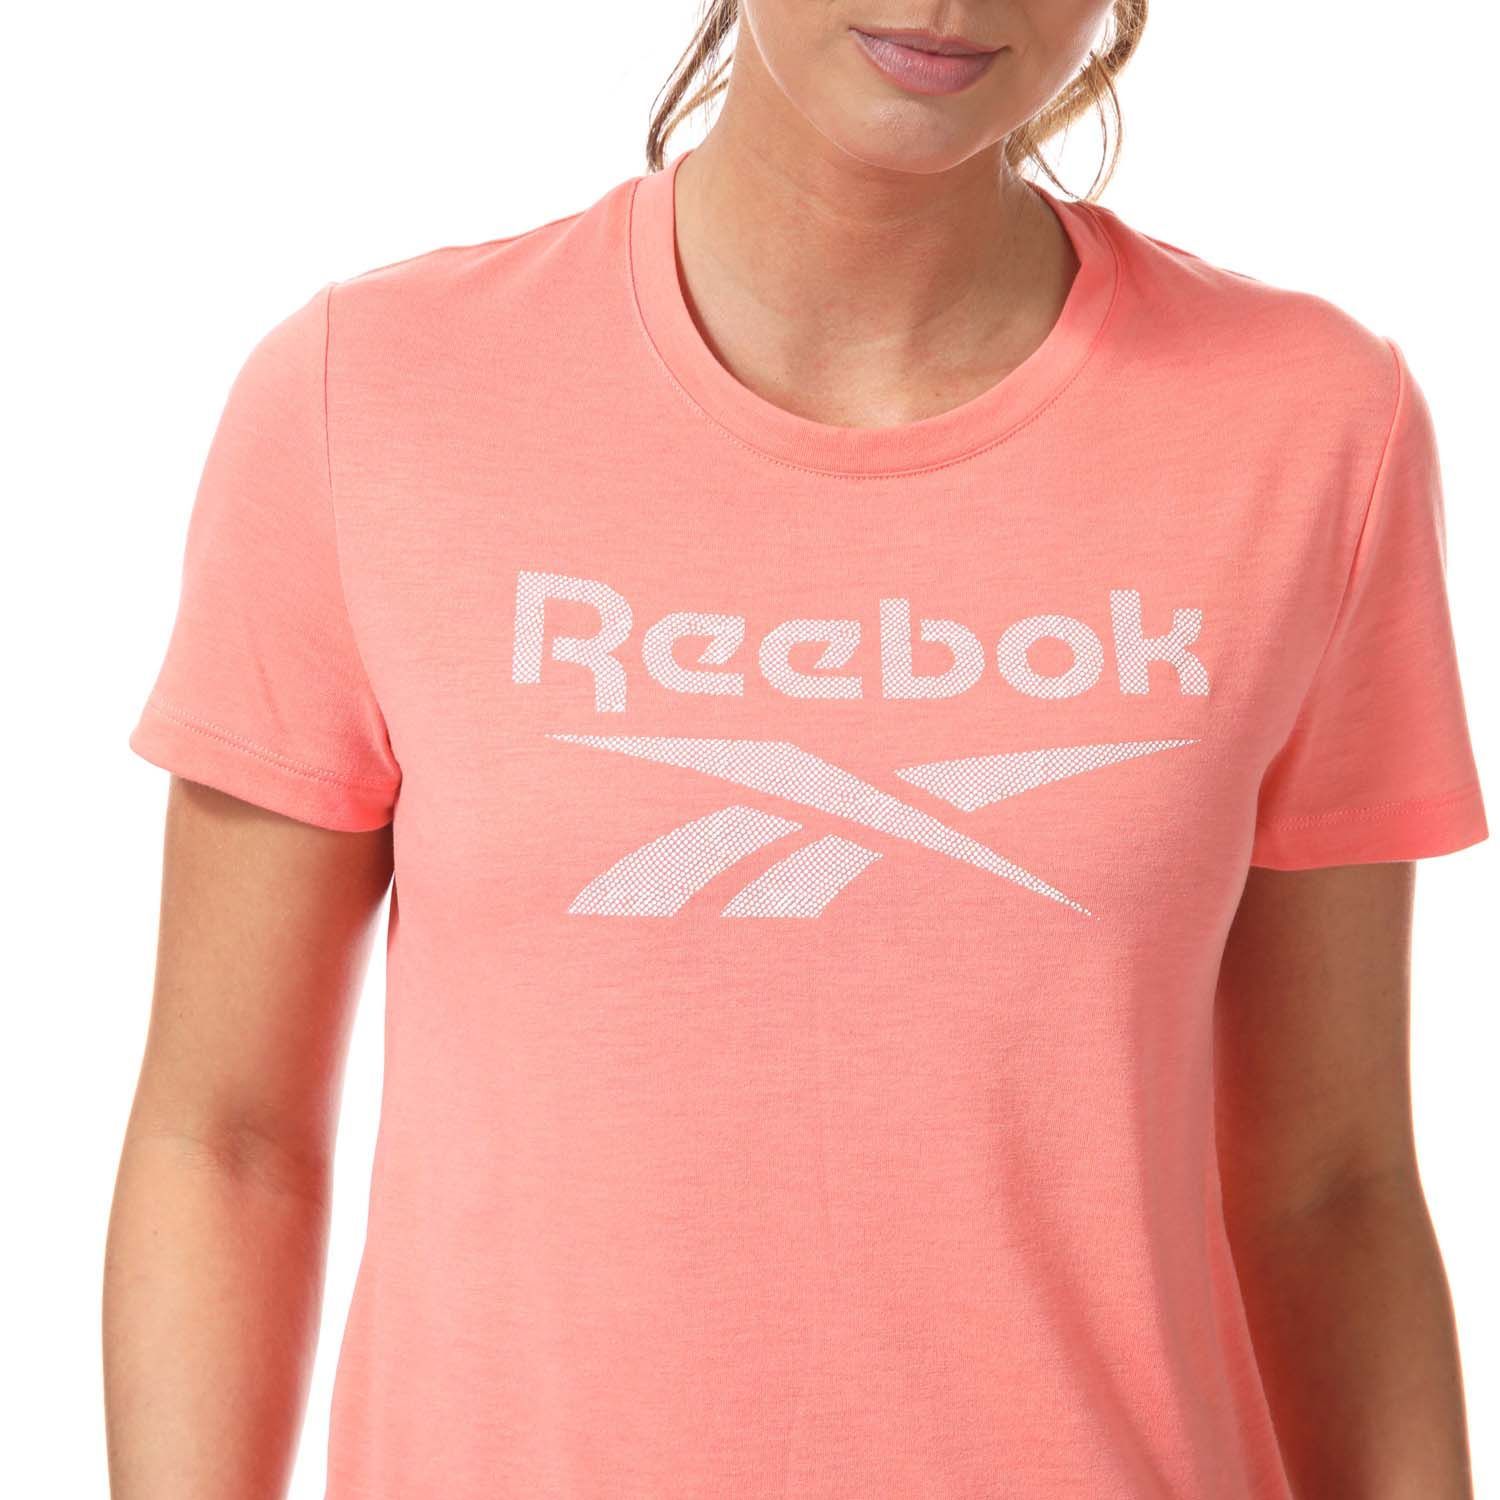 Womens Reebok Workout Ready Supremium Big Logo T- Shirt in coral.-Crew neck.- Short sleeves.- Supremium fabric offers lightweight comfort.- Reebok branding to the chest.- Speedwick fabric wicks sweat to help you stay cool and dry.- Slim fit.- Main Material: 65% Polyester  35% Rayon. - Ref: GI6865